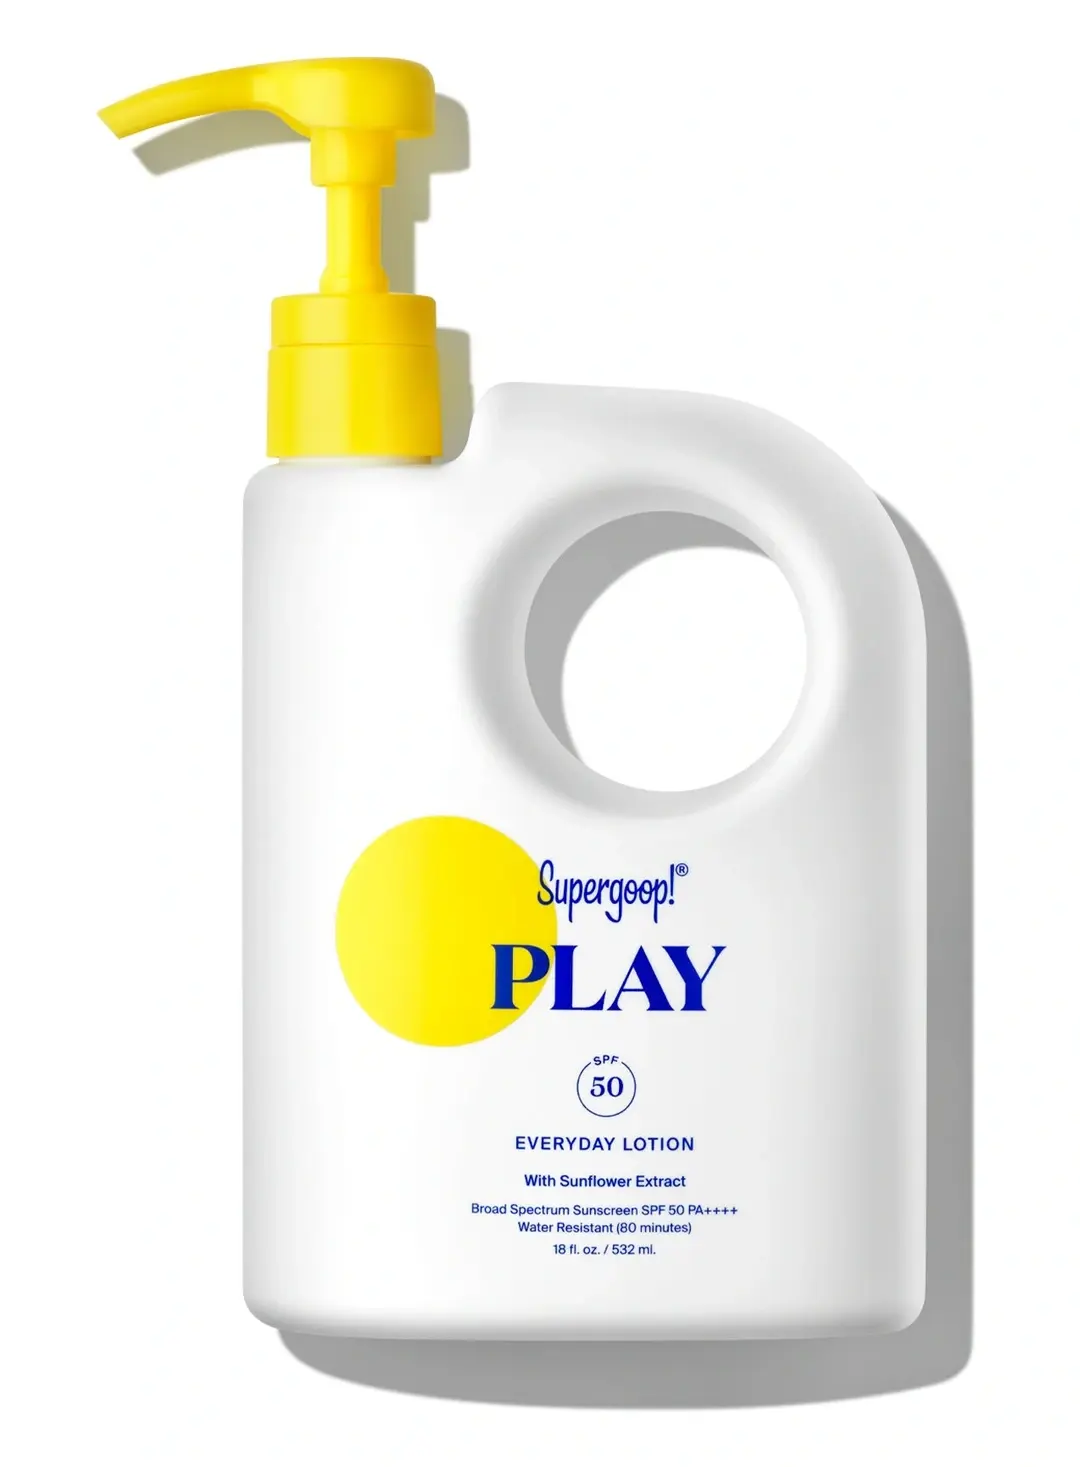 Supergoop! Everyday Play SPF 50 Lotion, 18 fl oz - Broad Spectrum Sunscreen for Sensitive Skin - Fast-Absorbing, Water & Sweat Resistant Body & Face Sunscreen - Athlete-Trusted, Great for Active Days